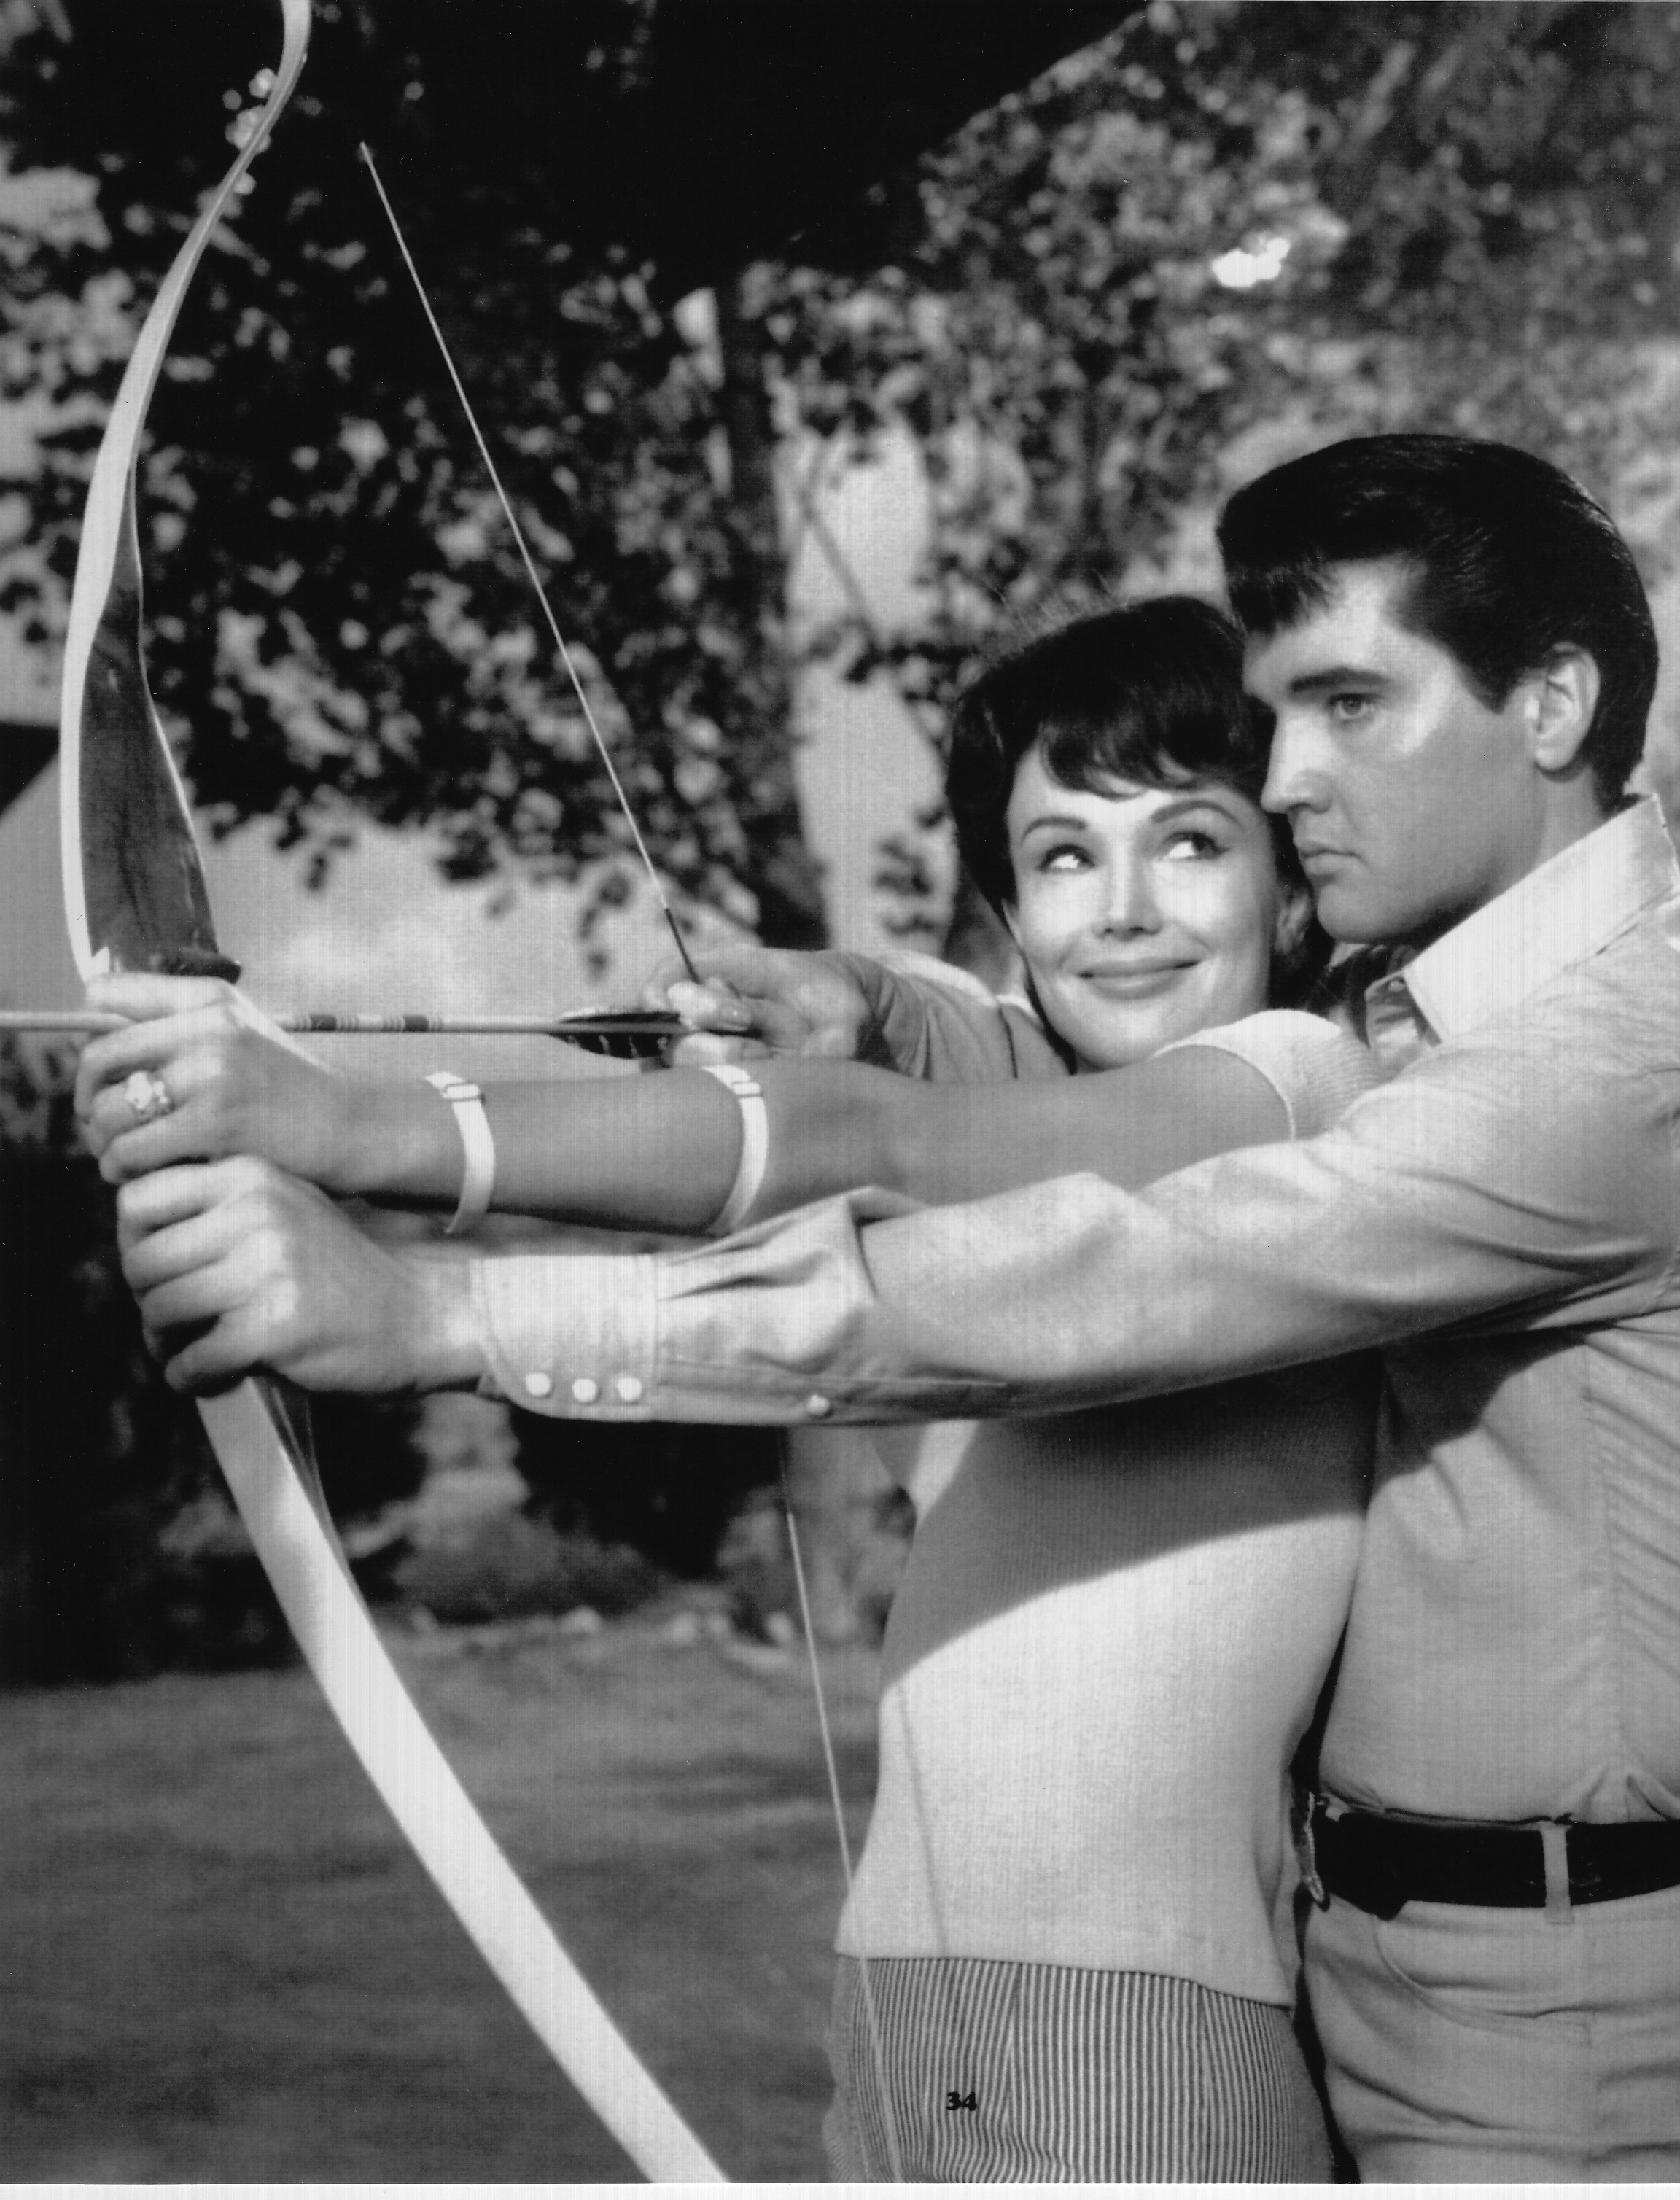 Francine York giving Elvis an archery lesson in Tickle Me 1966.